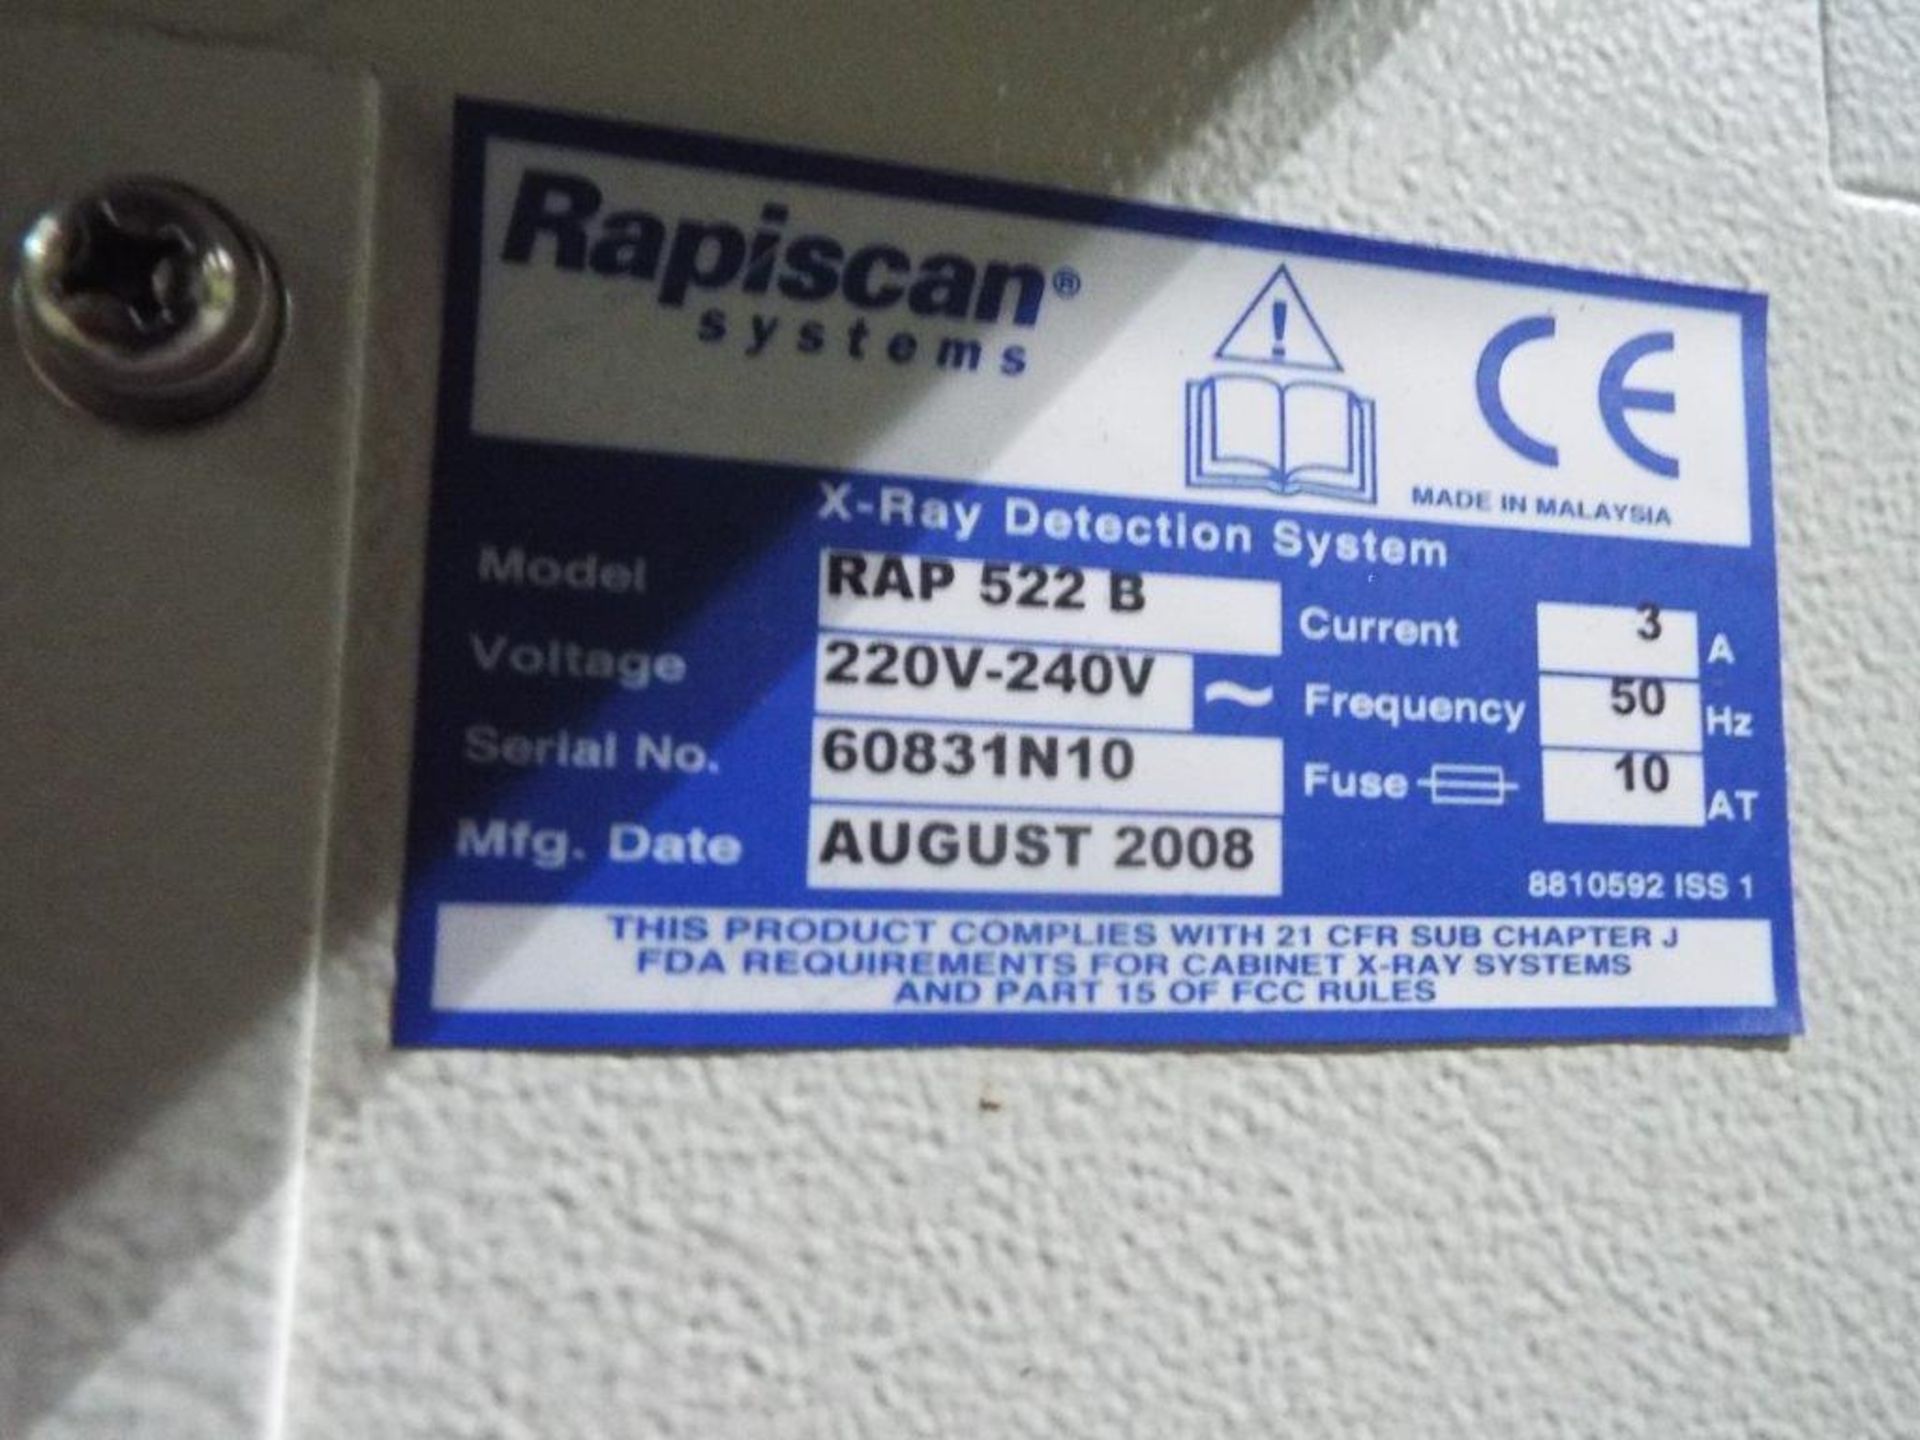 Rapiscan 522 B Security X-Ray System - Image 13 of 24